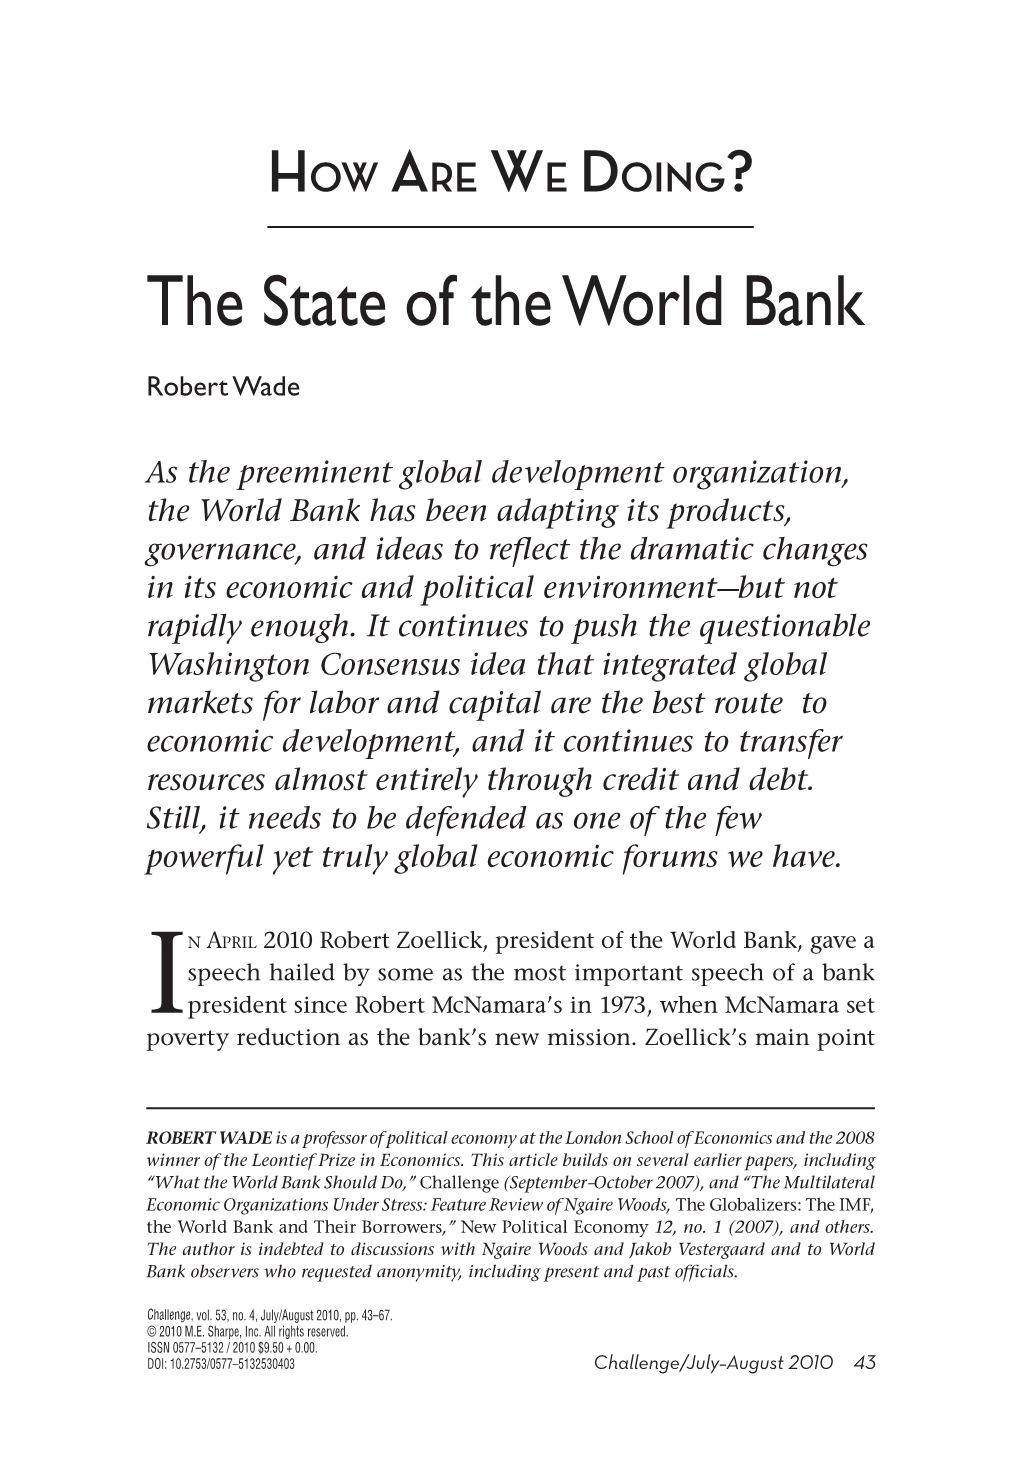 The State of the World Bank